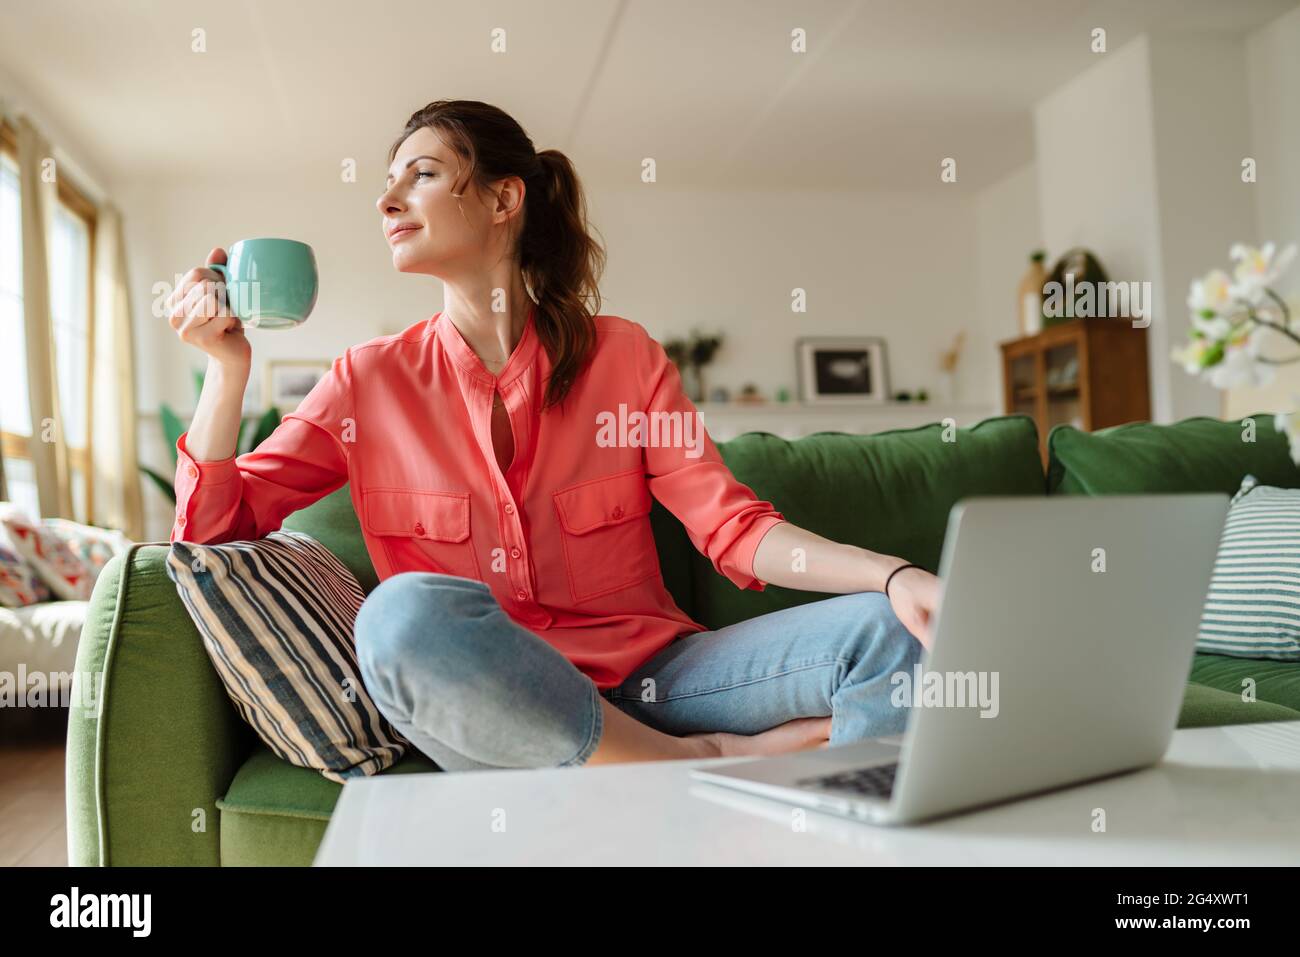 Happy young woman sitting on a couch at home. The woman is drinking tea. Stock Photo